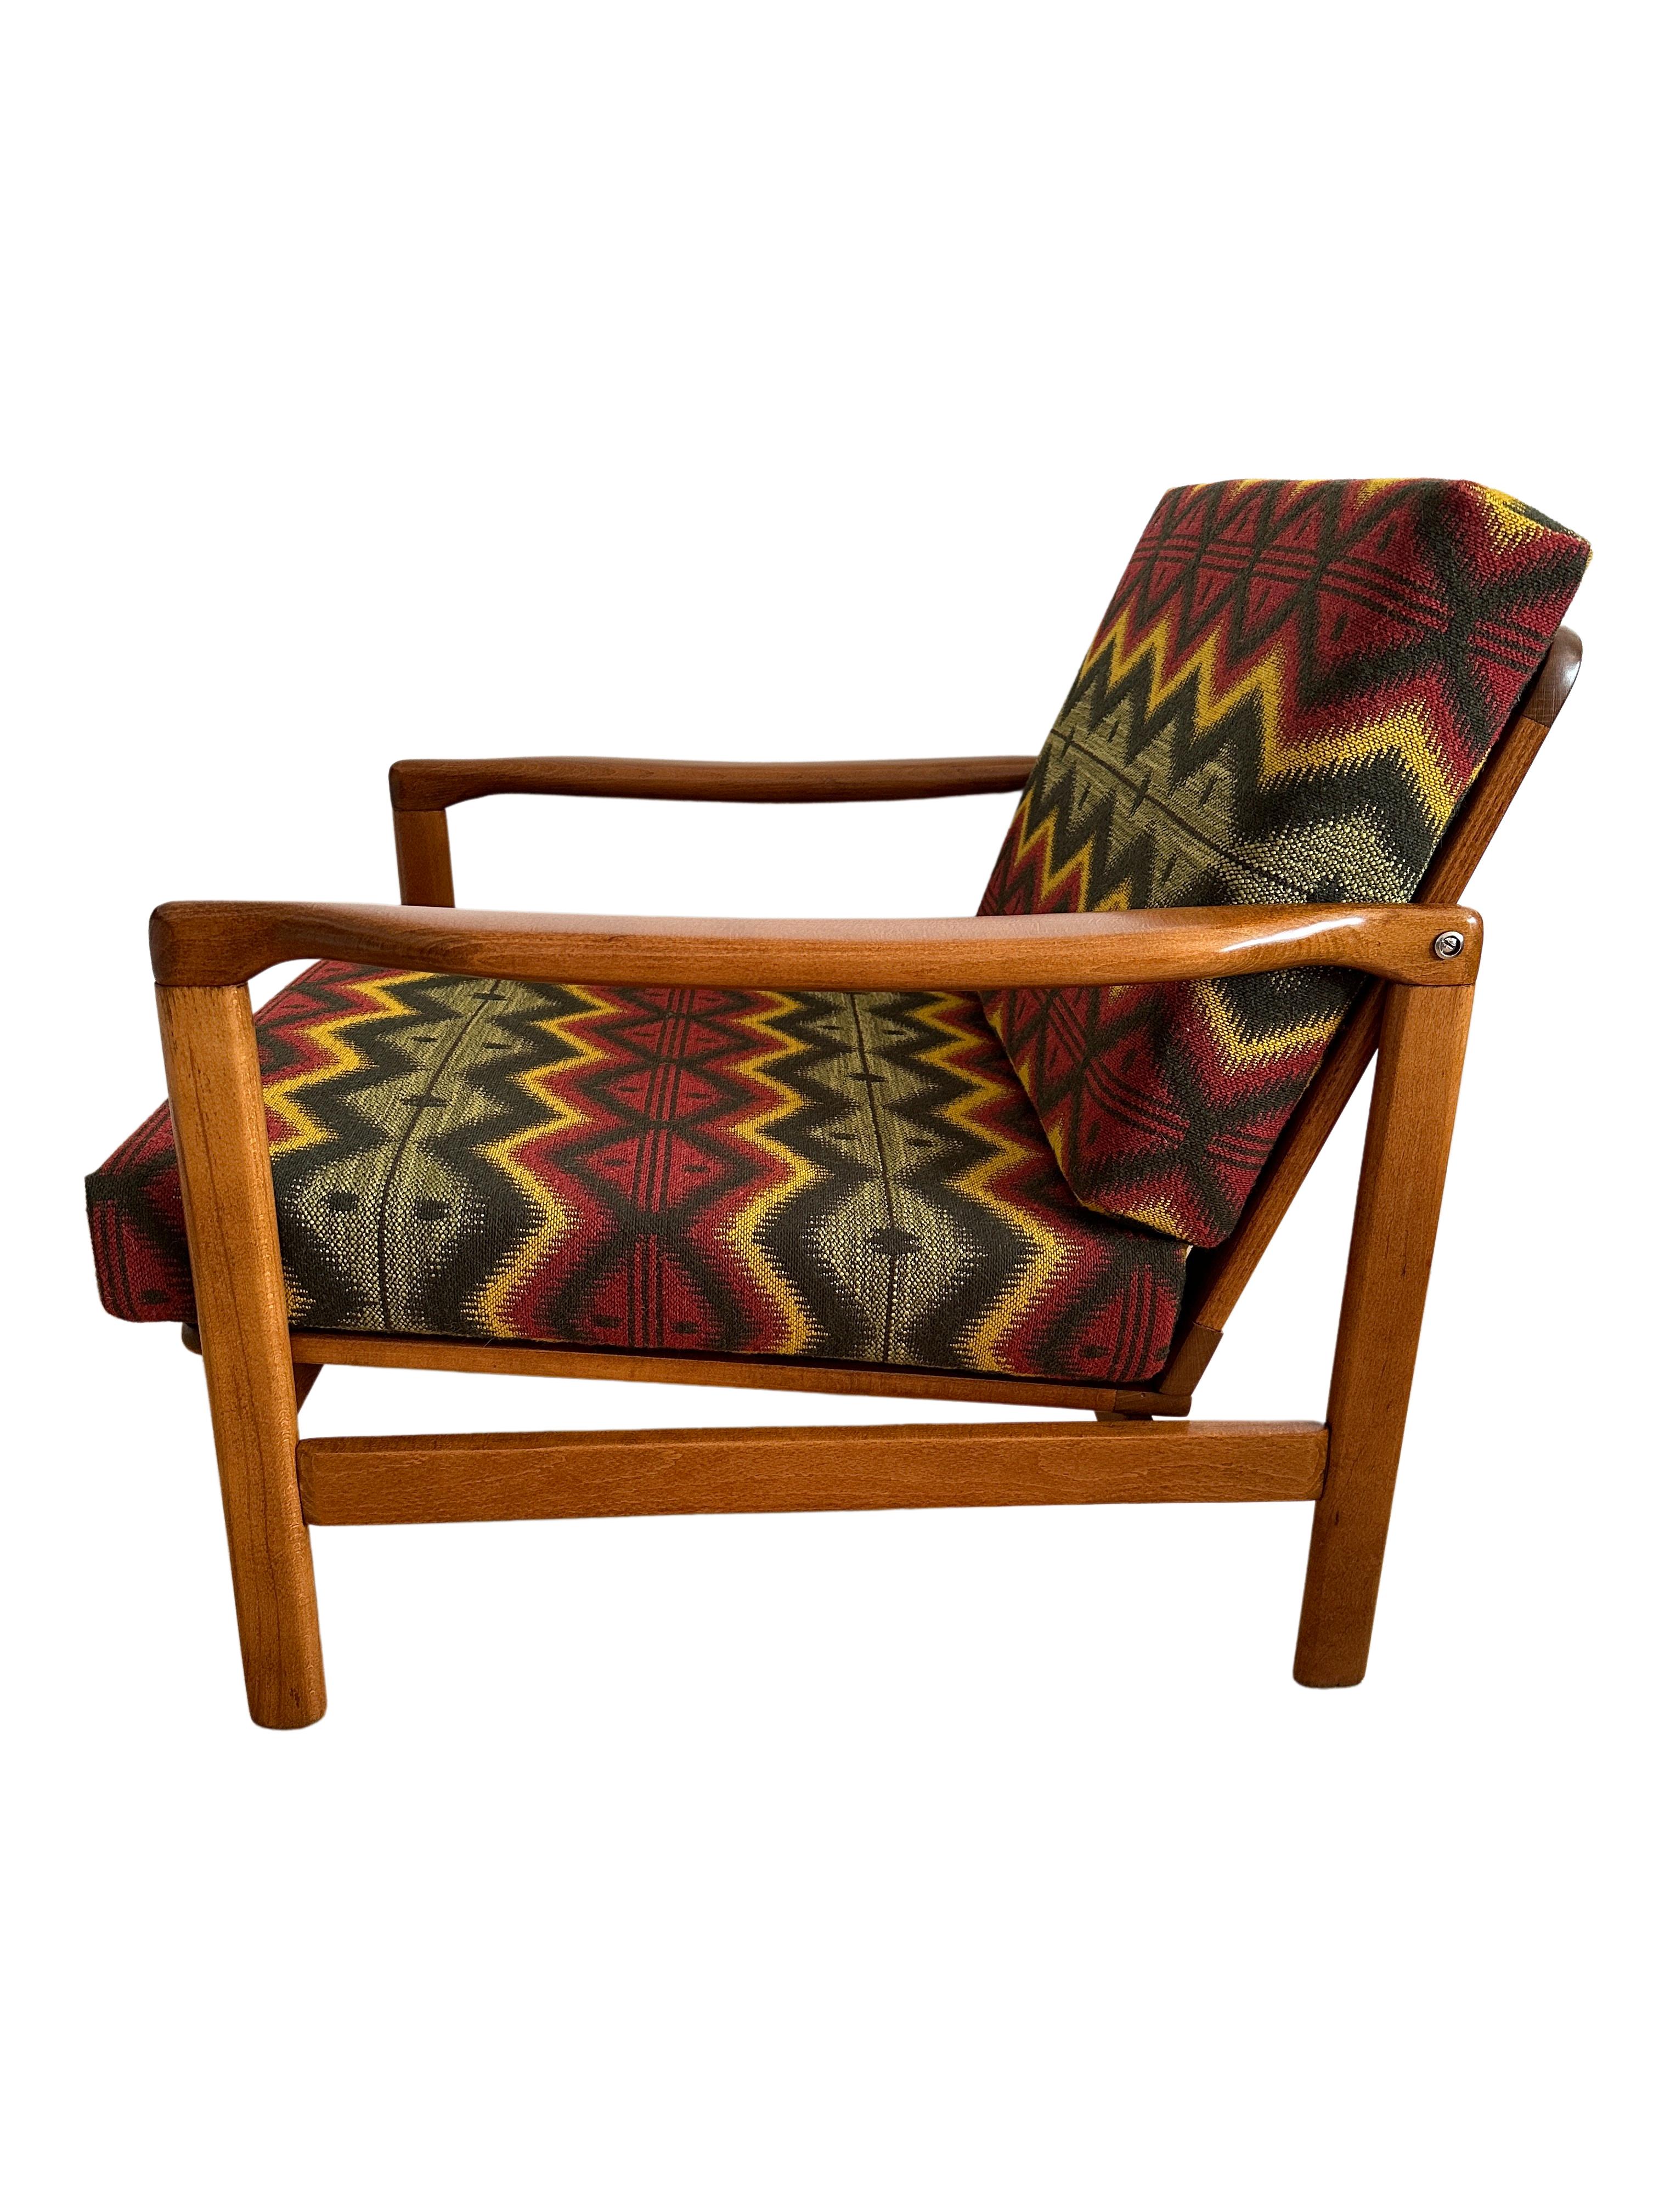 20th Century Midcentury Armchair by Zenon Bączyk, Mind the Gap Upholstery, Europe, 1960s For Sale